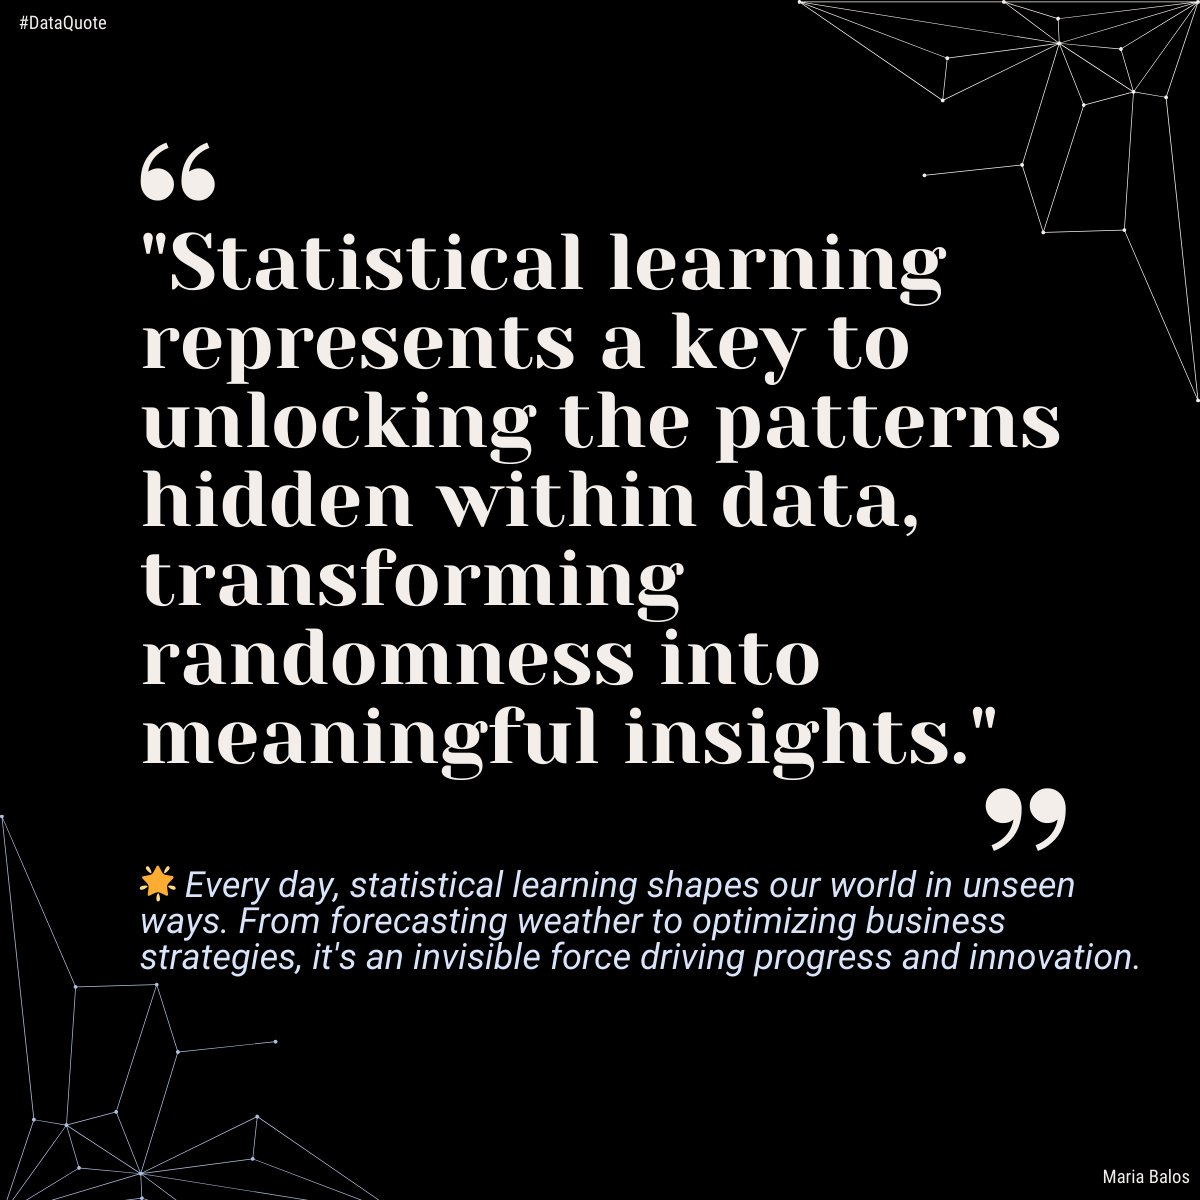 💭 statistical learning in action is thinking about how Netflix recommends your next watch or how your GPS predicts traffic. It is all about making sense of massive data to enhance our daily lives. 

#StatisticalLearning #DataScience #MachineLearning #InnovationInData